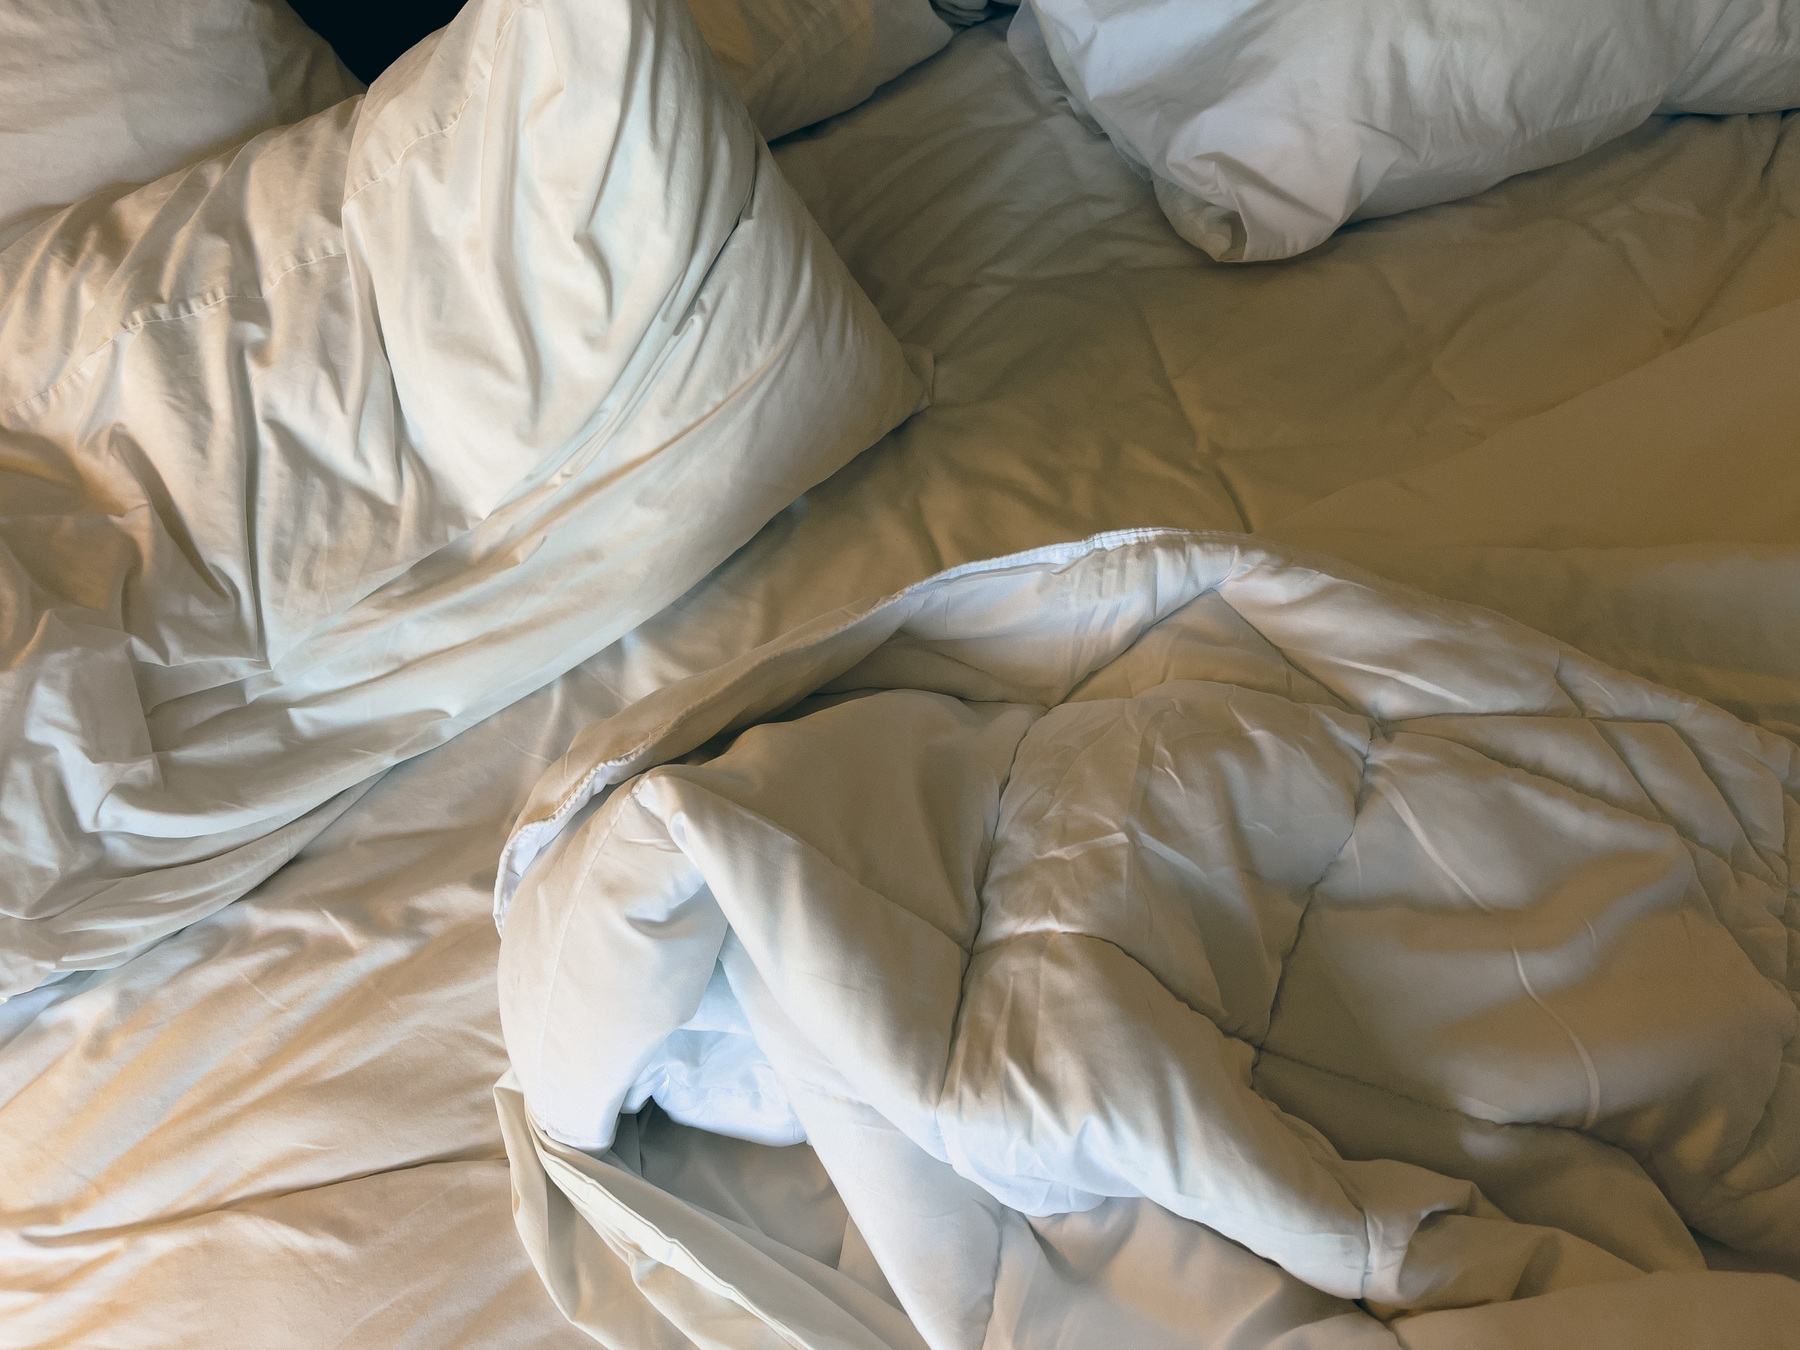 Closeup of rumpled pillows, blankets and sheets on a hotel room bed.